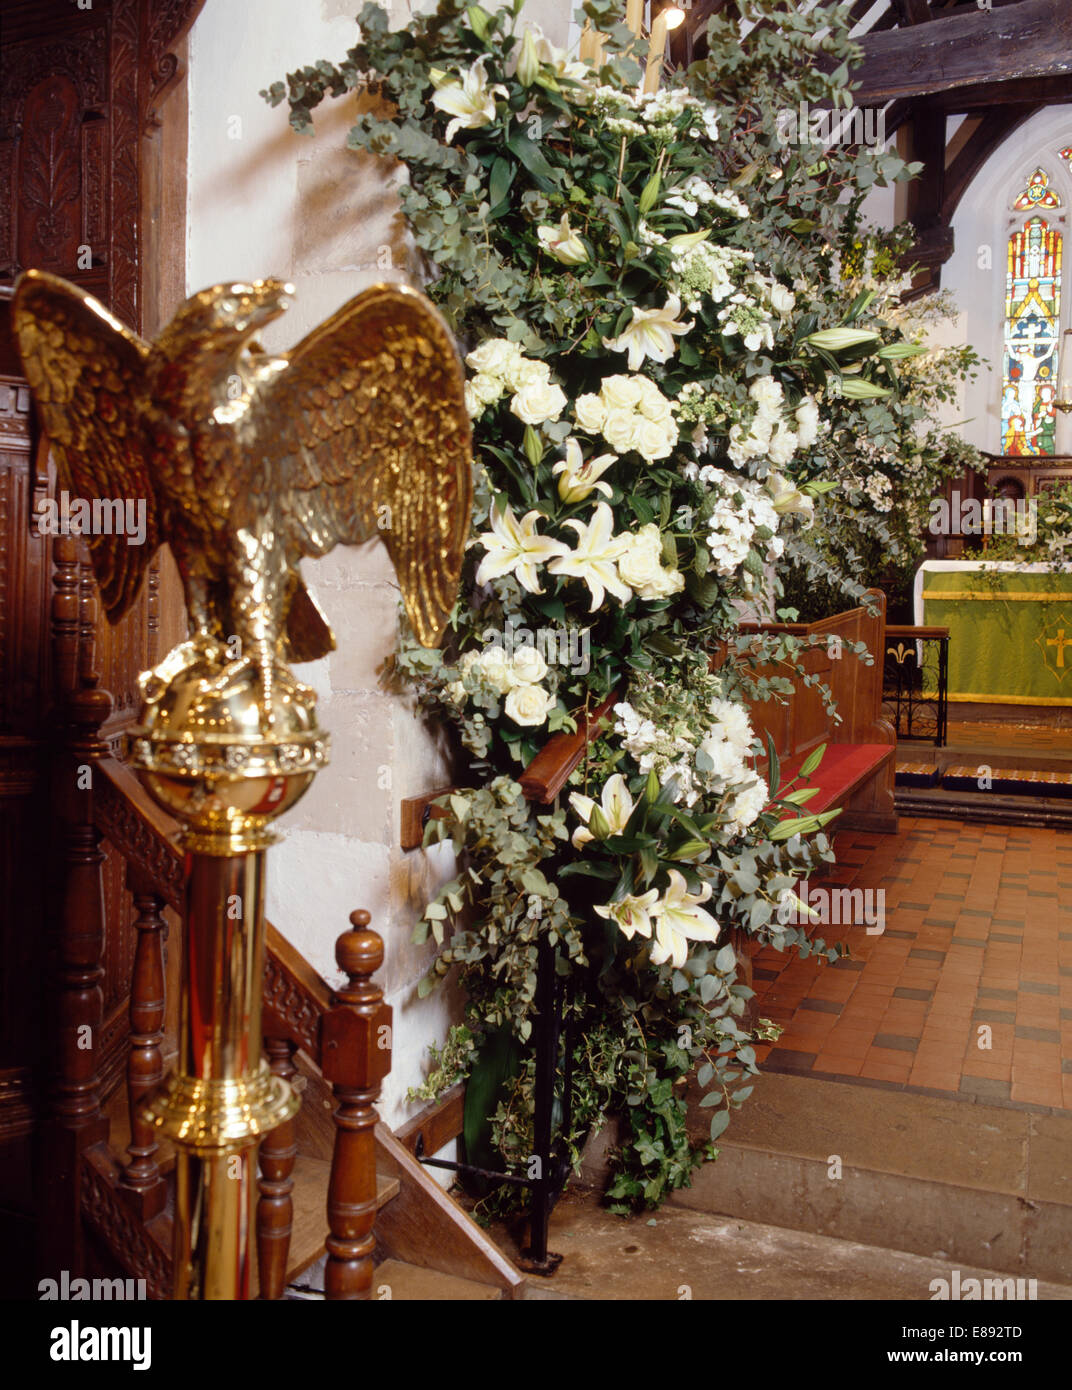 Gold eagle statue and white lilies in sumptuous floral arrangement for country church wedding Stock Photo